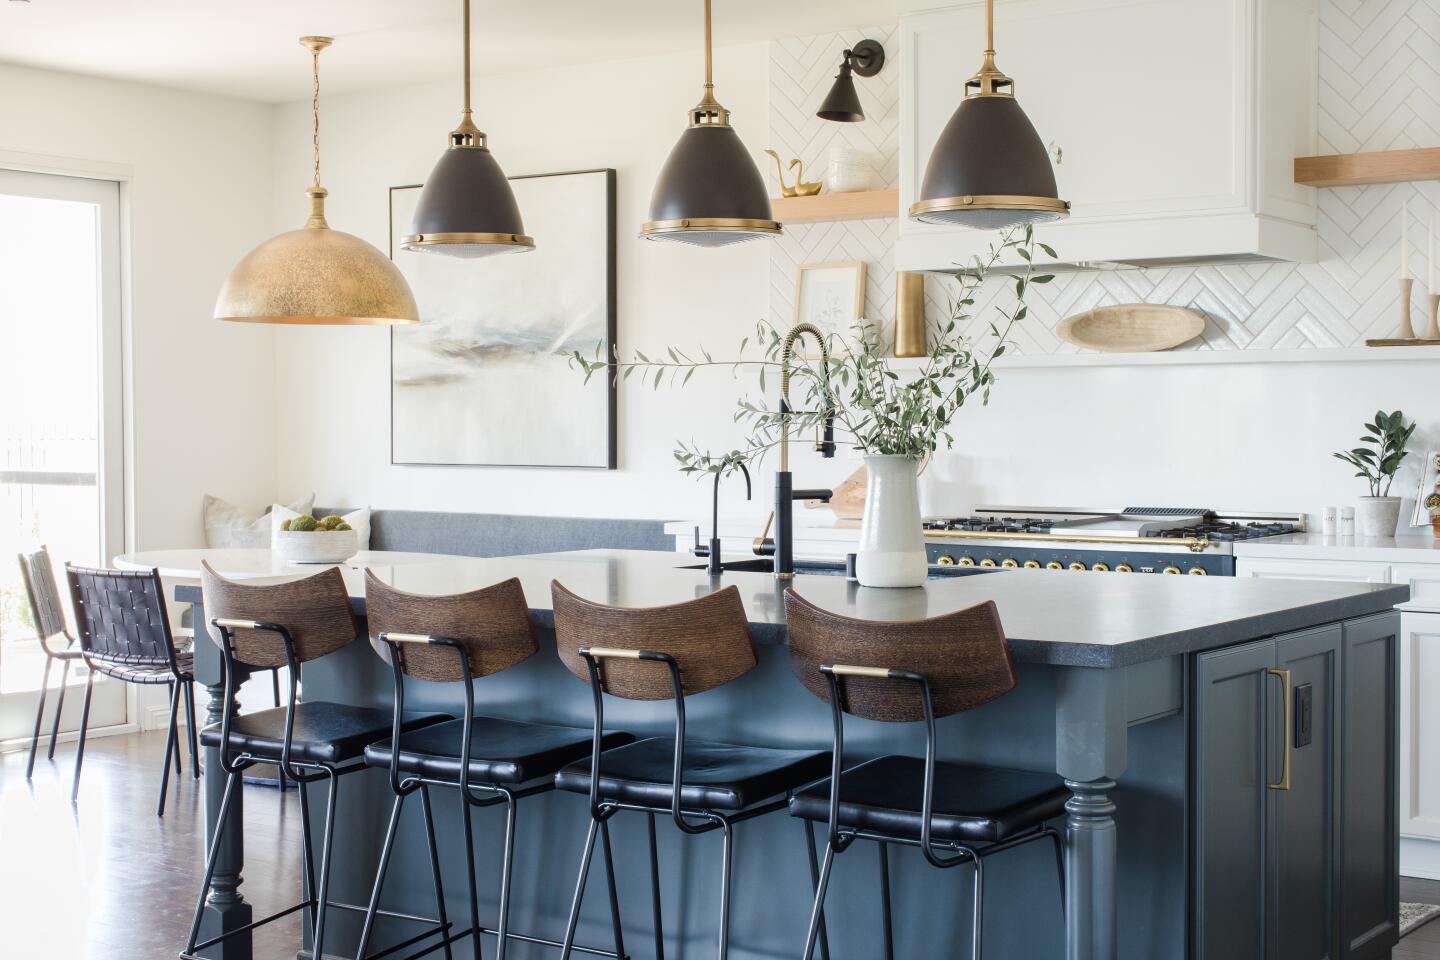 The island cabinets were painted charcoal and matched with an almost 8-foot Black Mist honed slab. Hanging above the island are mixed-metal Schoolhouse pendants in antique brass bronze.